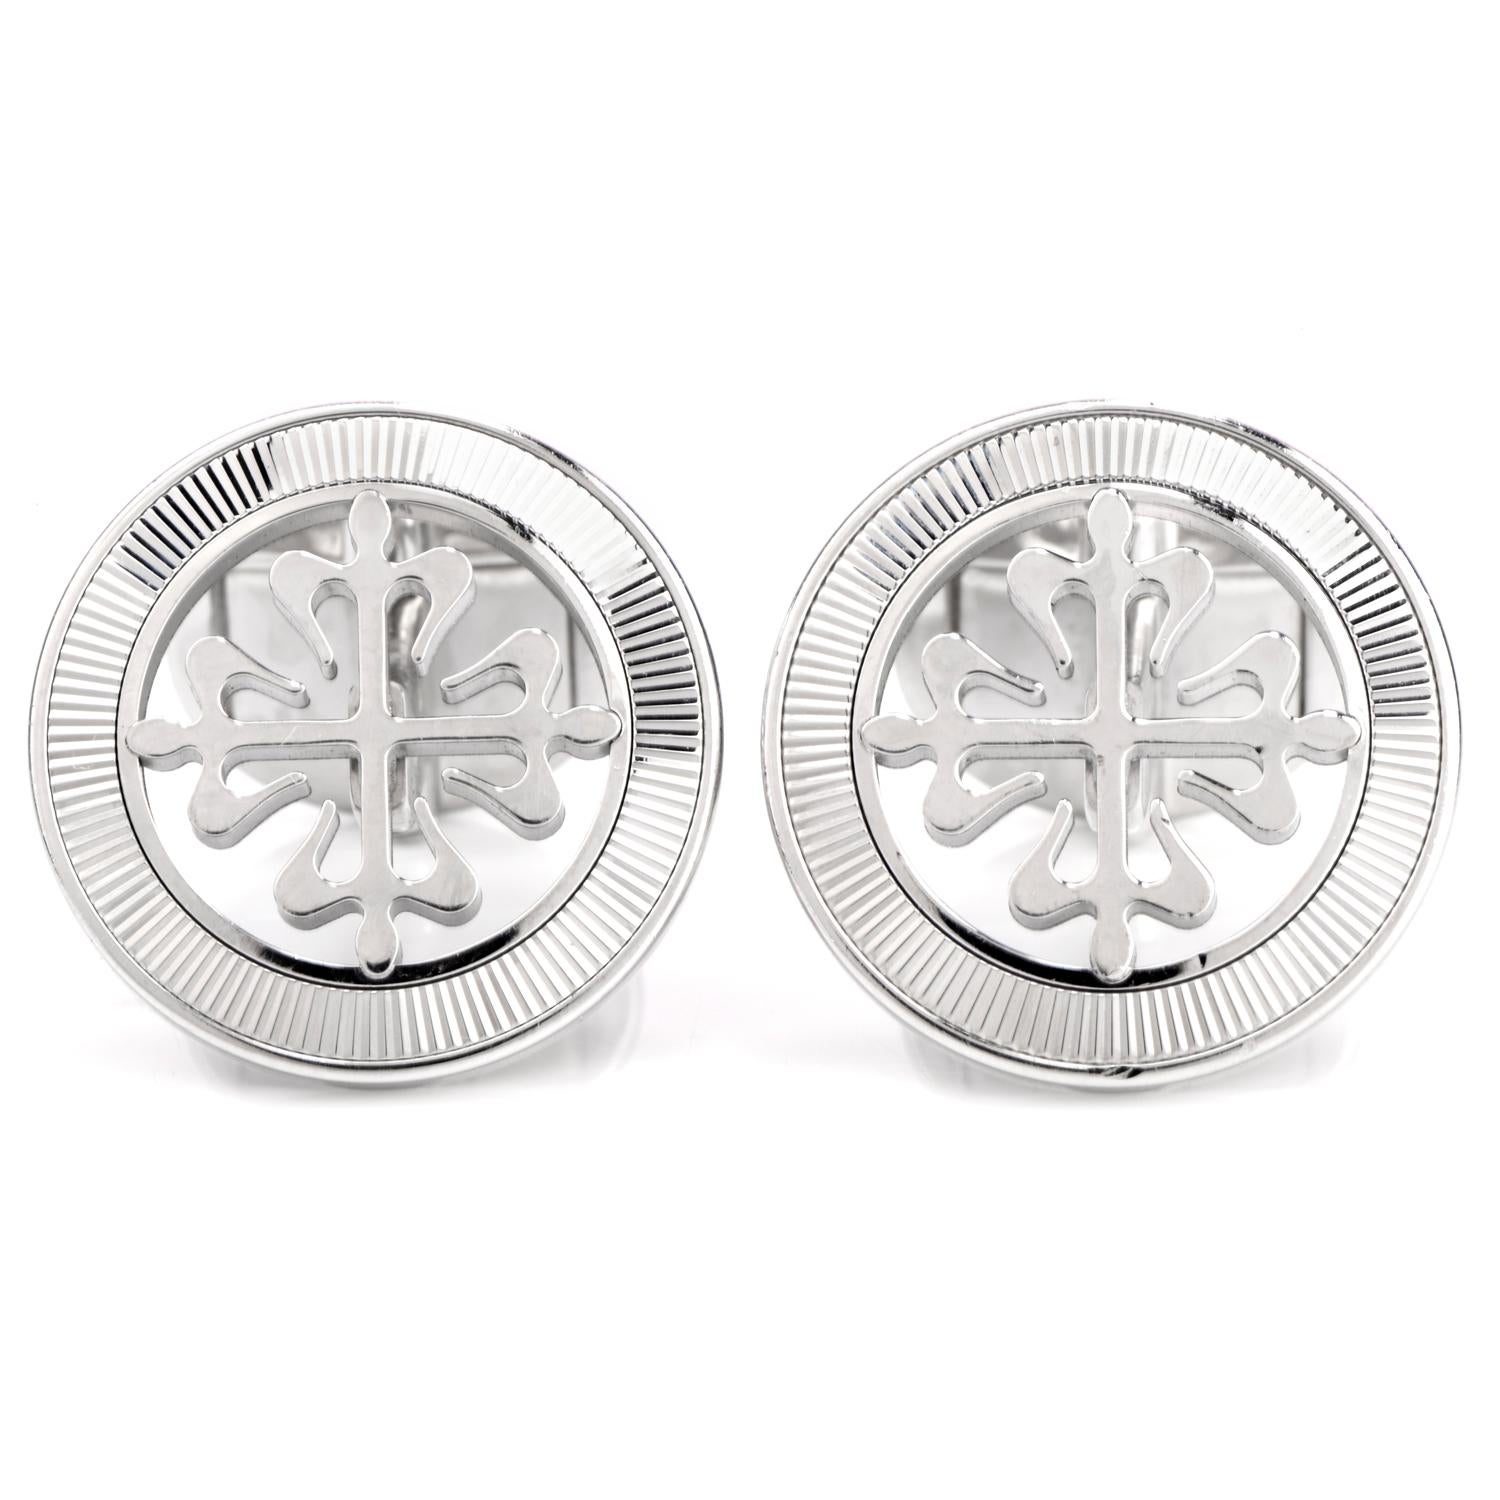 These Patek Philippe cufflinks Calatrava Cross were crafted in 18K gold, Circa 2010. 

Each round guilloched outer ring, inner Calatrava cross decoration, with rigid connecting bar to swivel terminal,

signed 'Patek Philippe Geneva

19mm